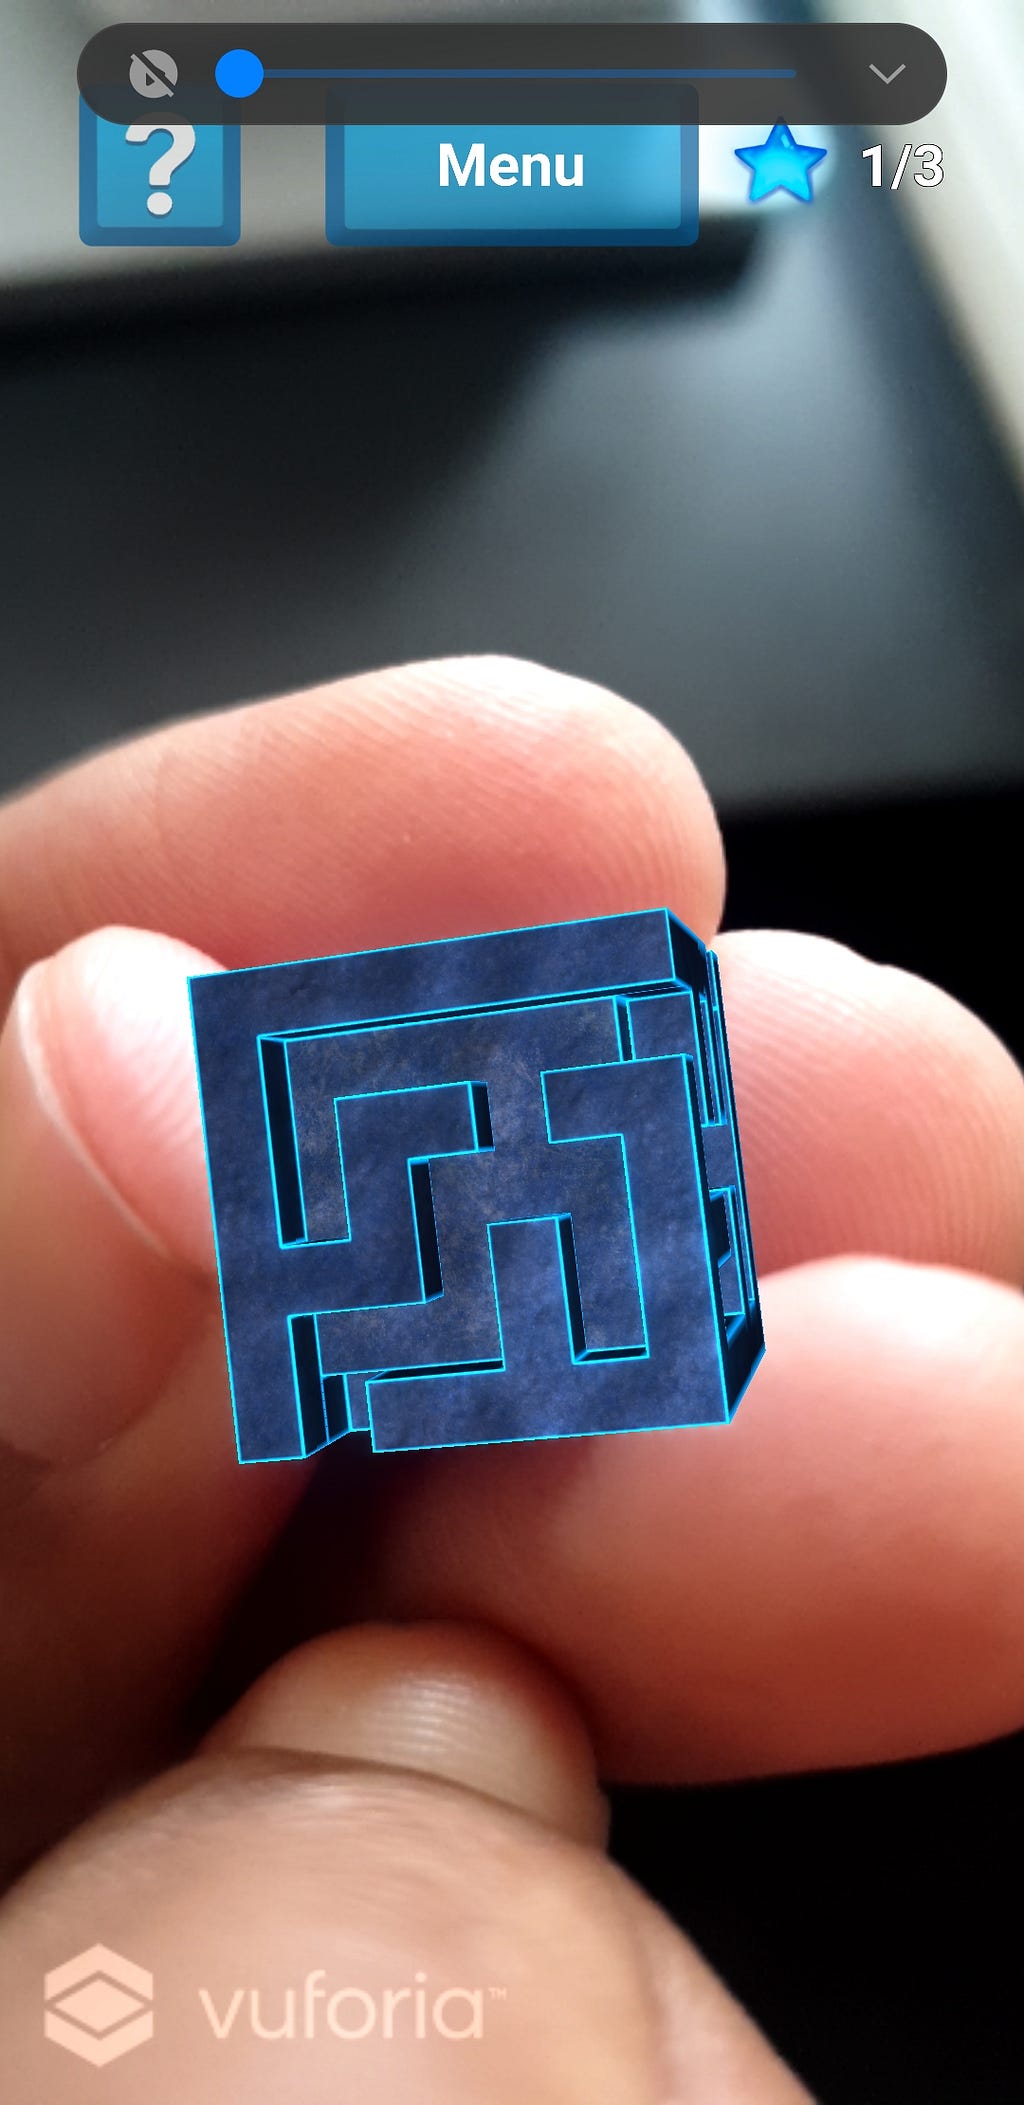 AR cube with a maze indented into it, held by hand